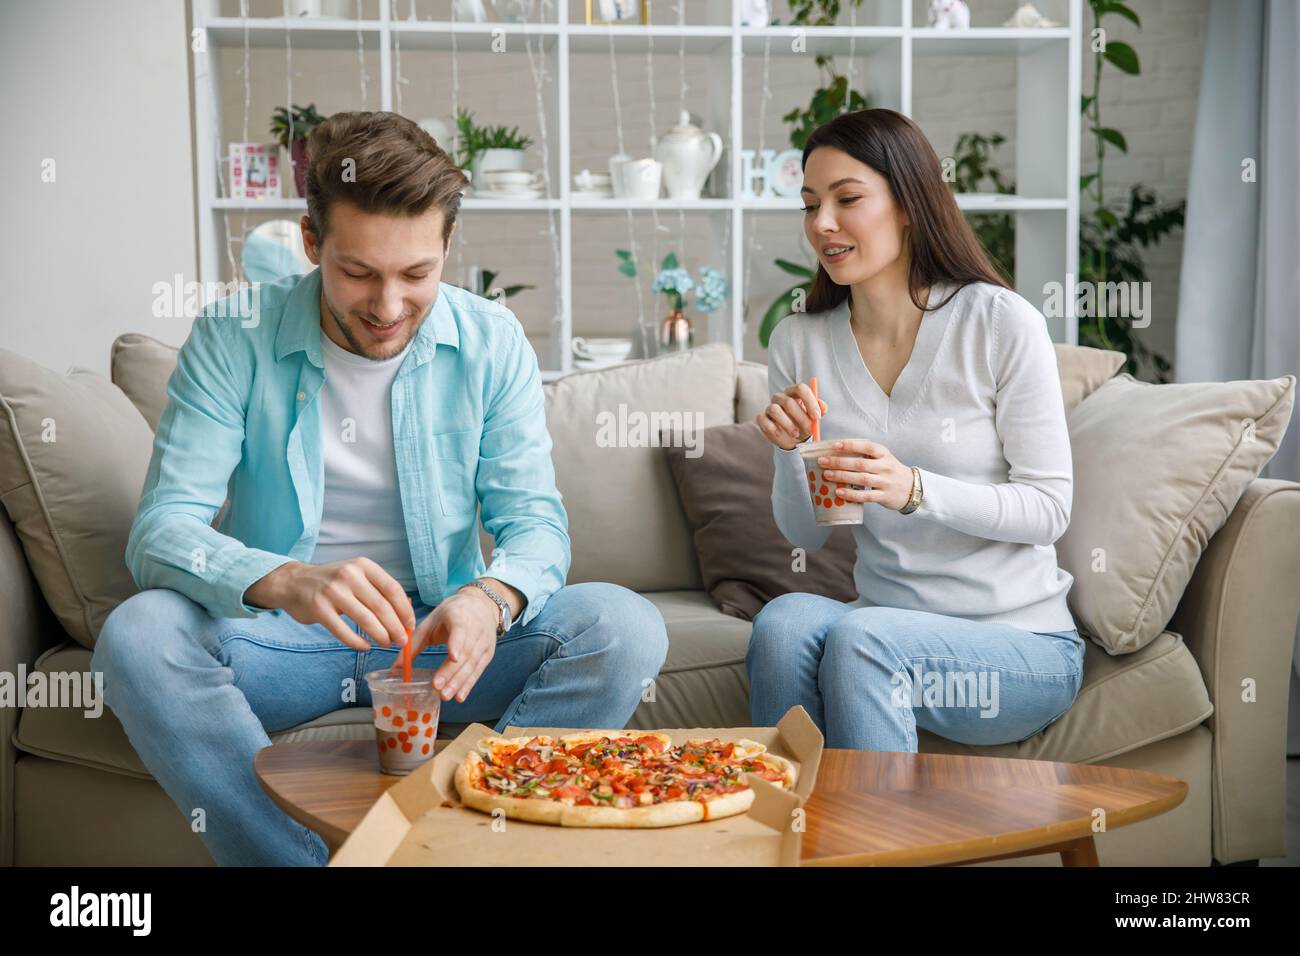 Couple sharing pizza and eating Stock Photo